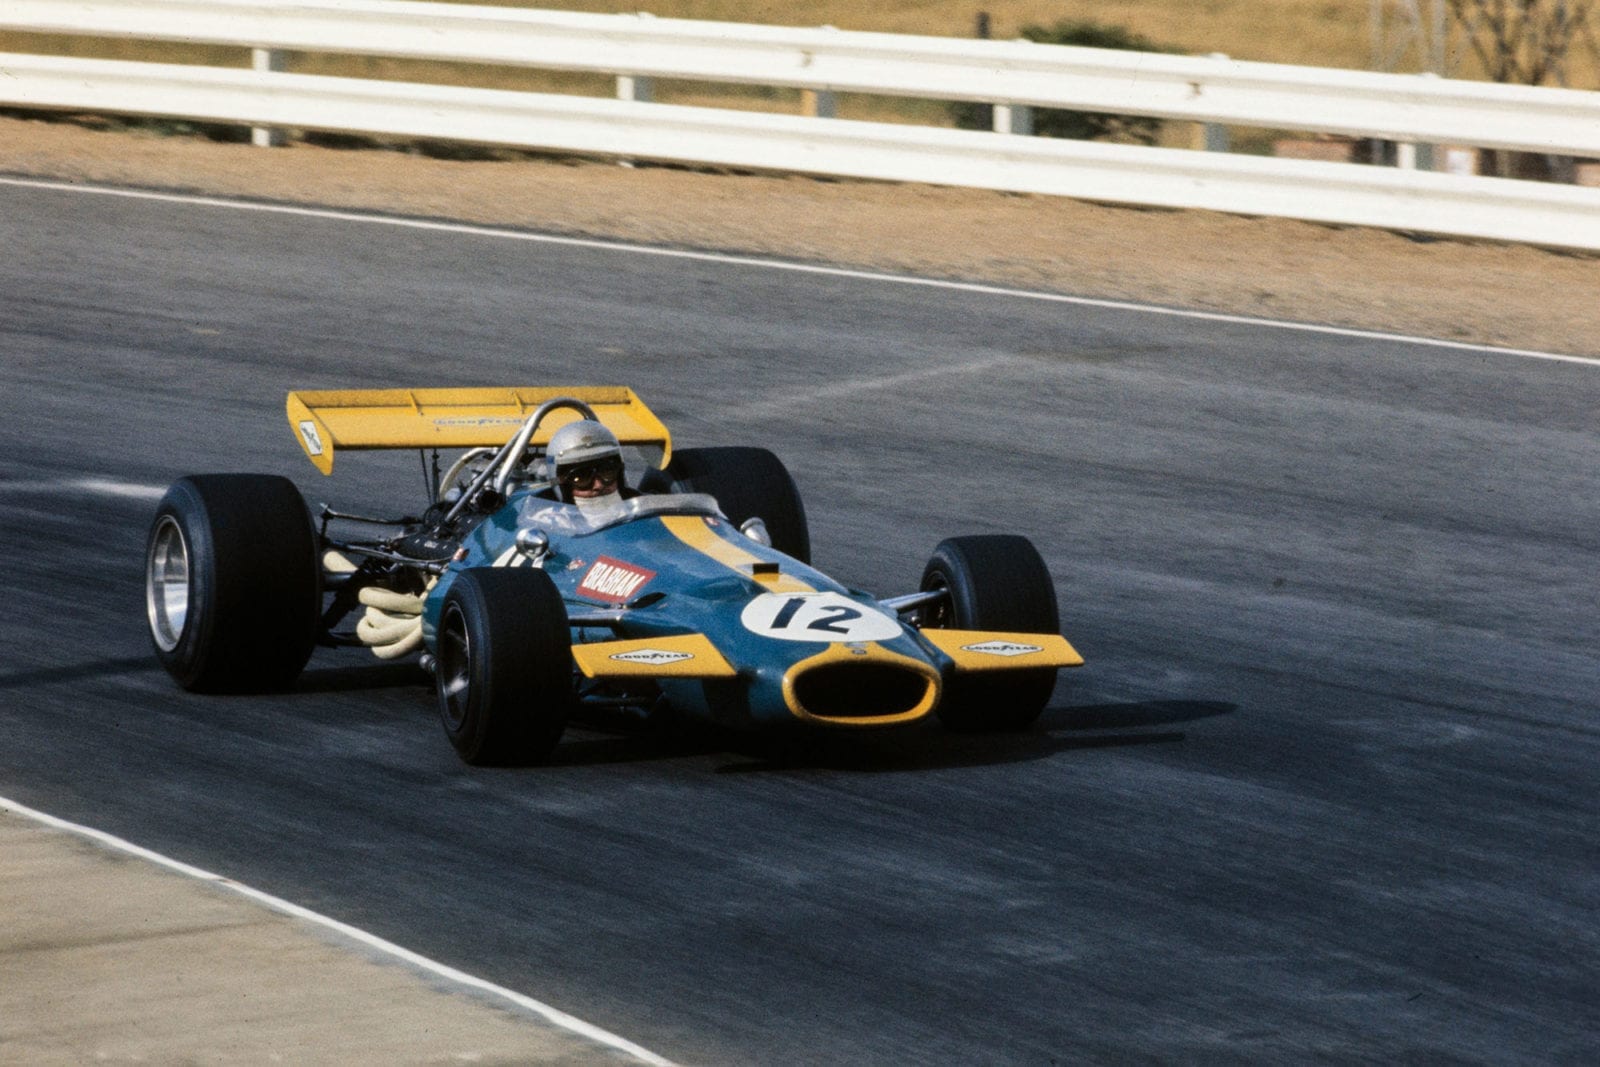 Jack Brabham driving for his own Brabham team at the 1969 South African Grand Prix.